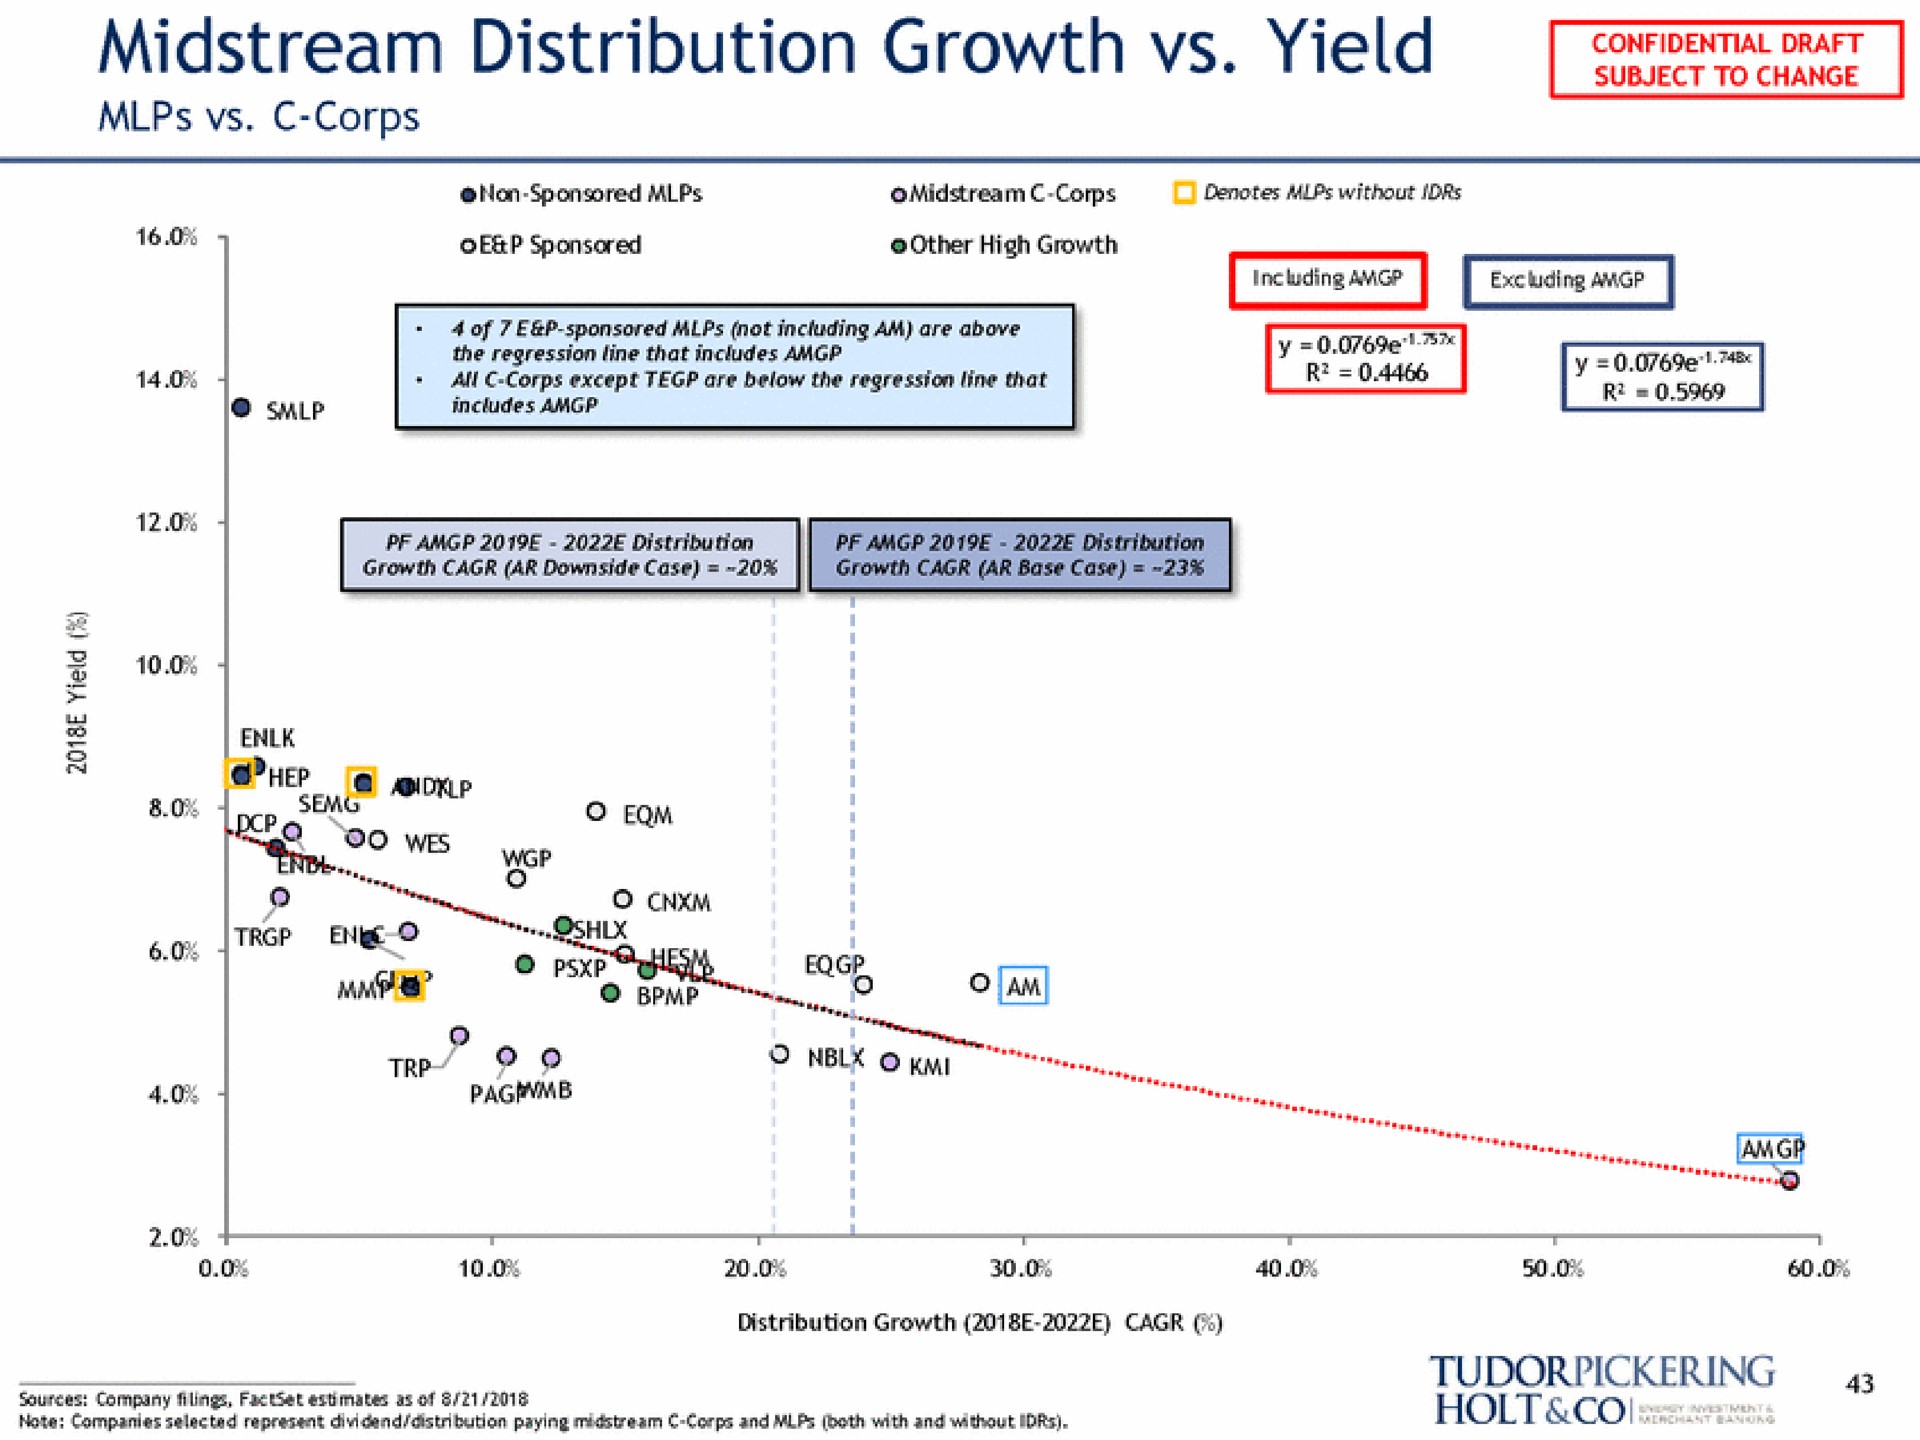 midstream distribution growth yield a | Tudor, Pickering, Holt & Co